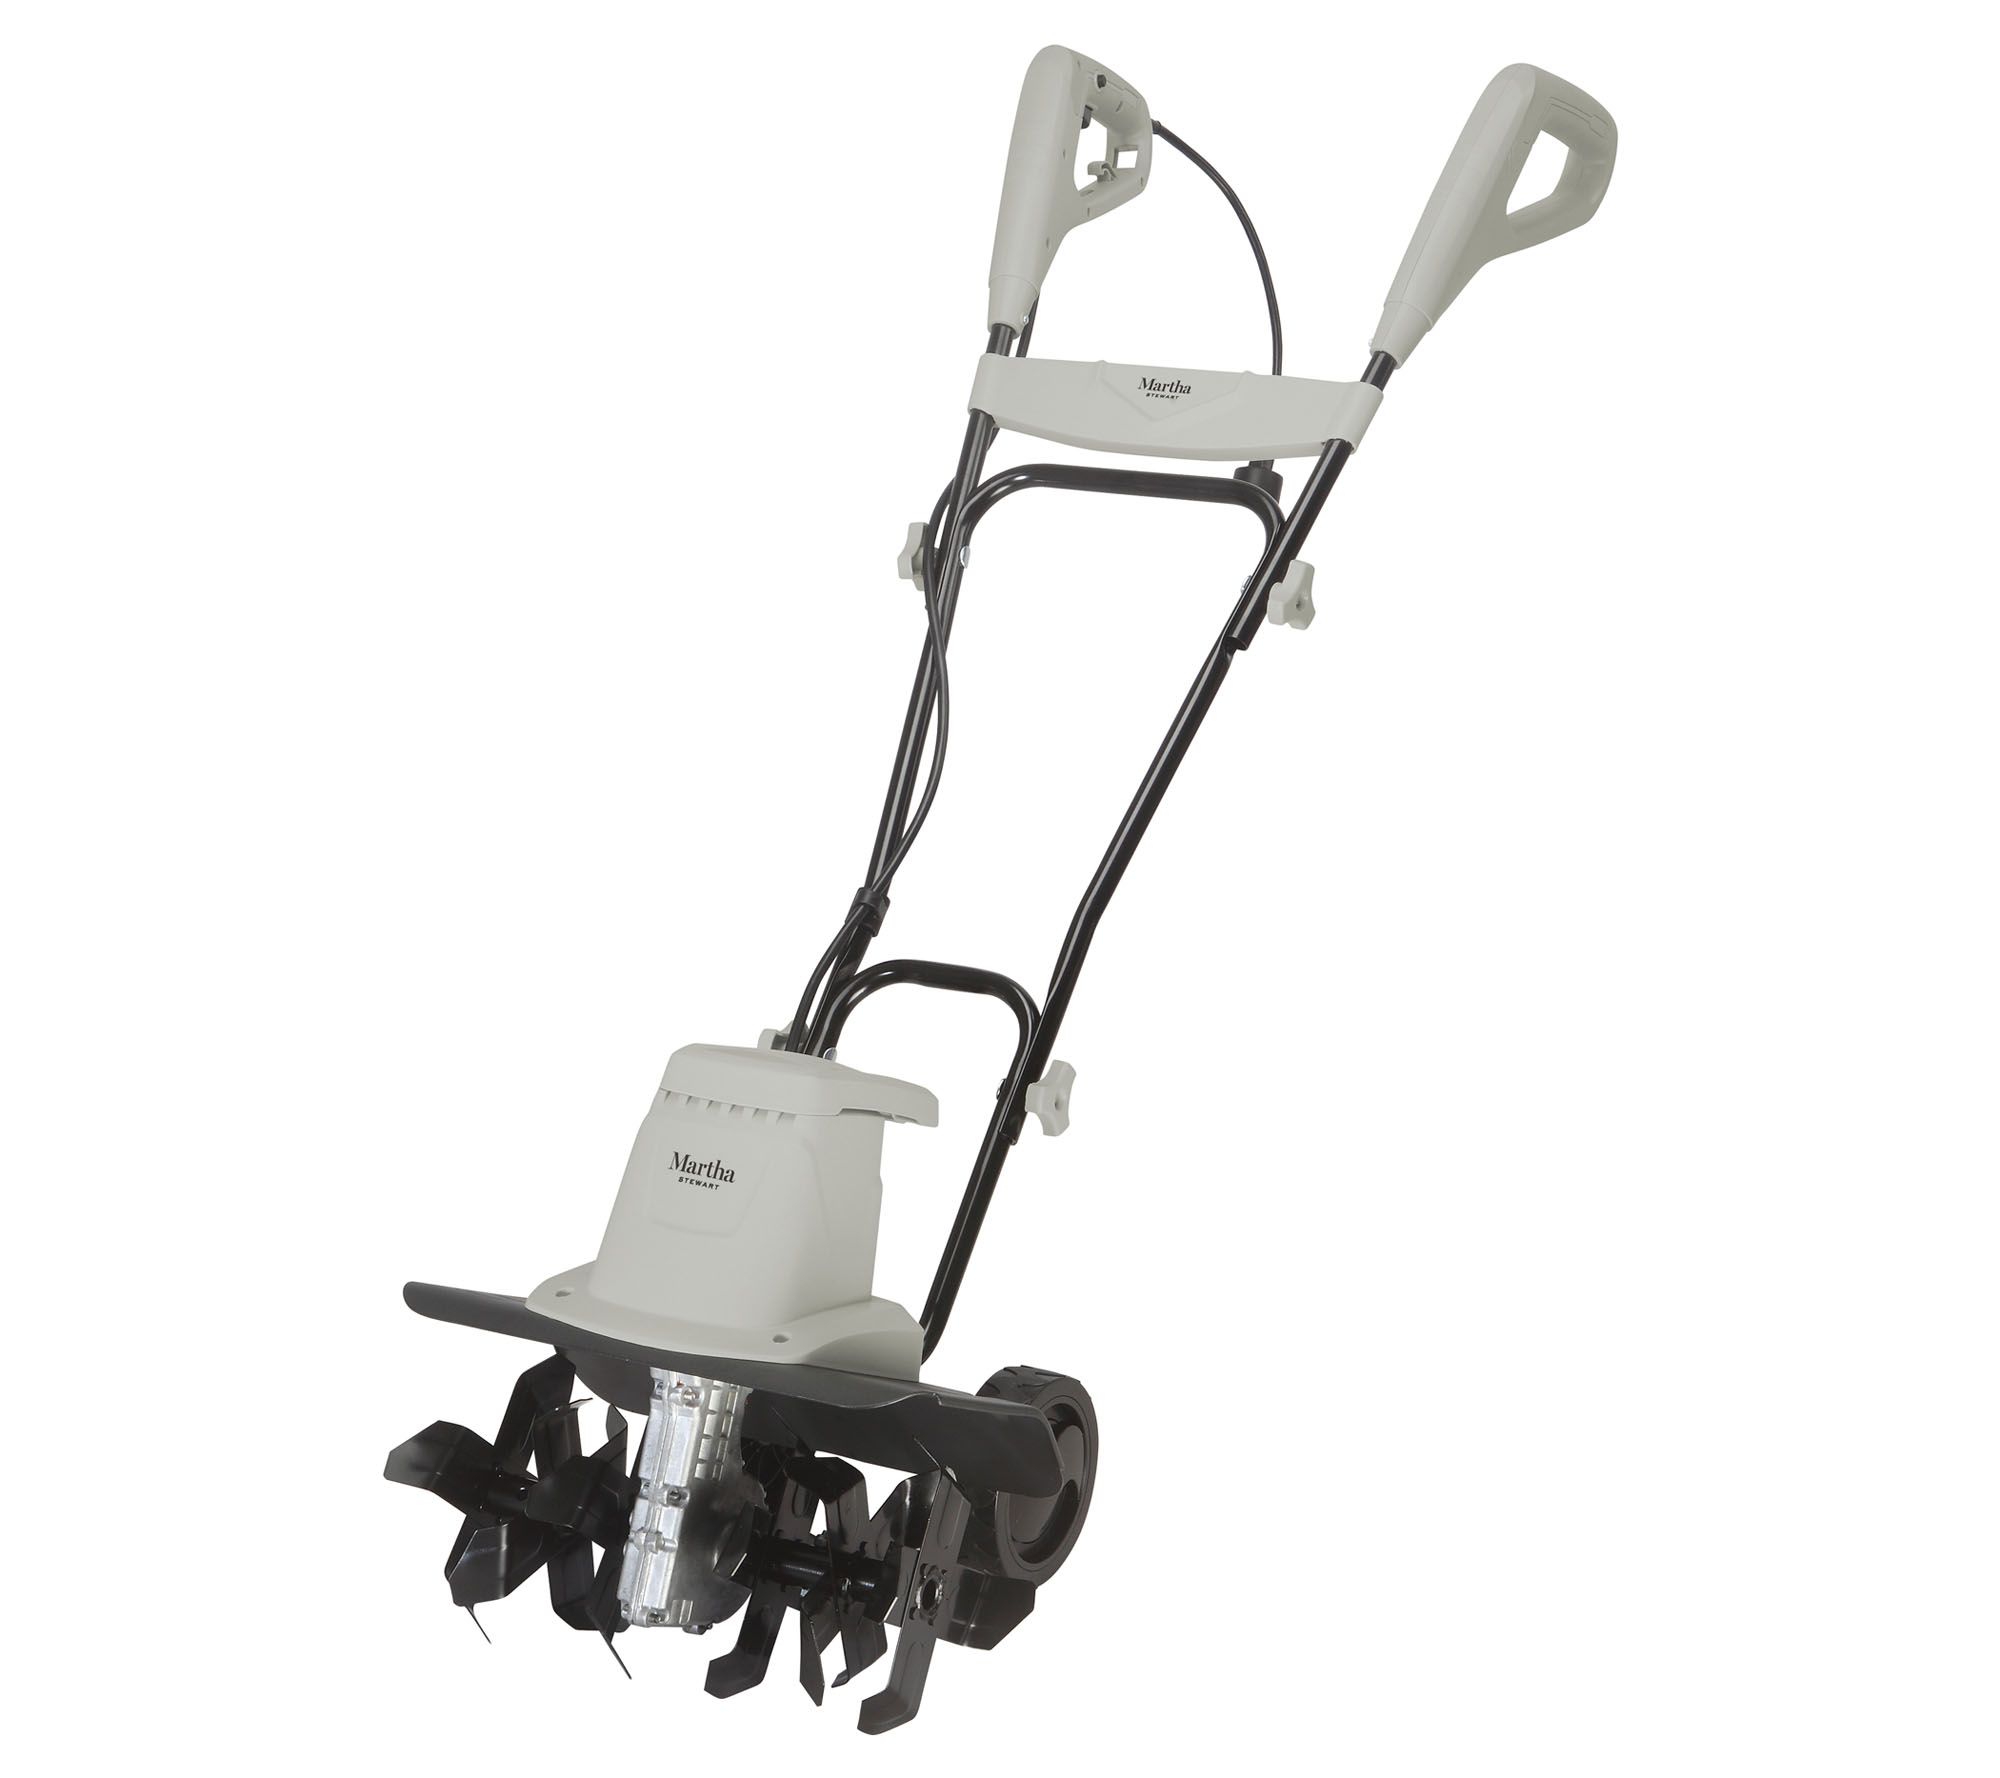 17-Inch 13.5 Amp Corded Electric Tiller and Cultivator 9 Tilling